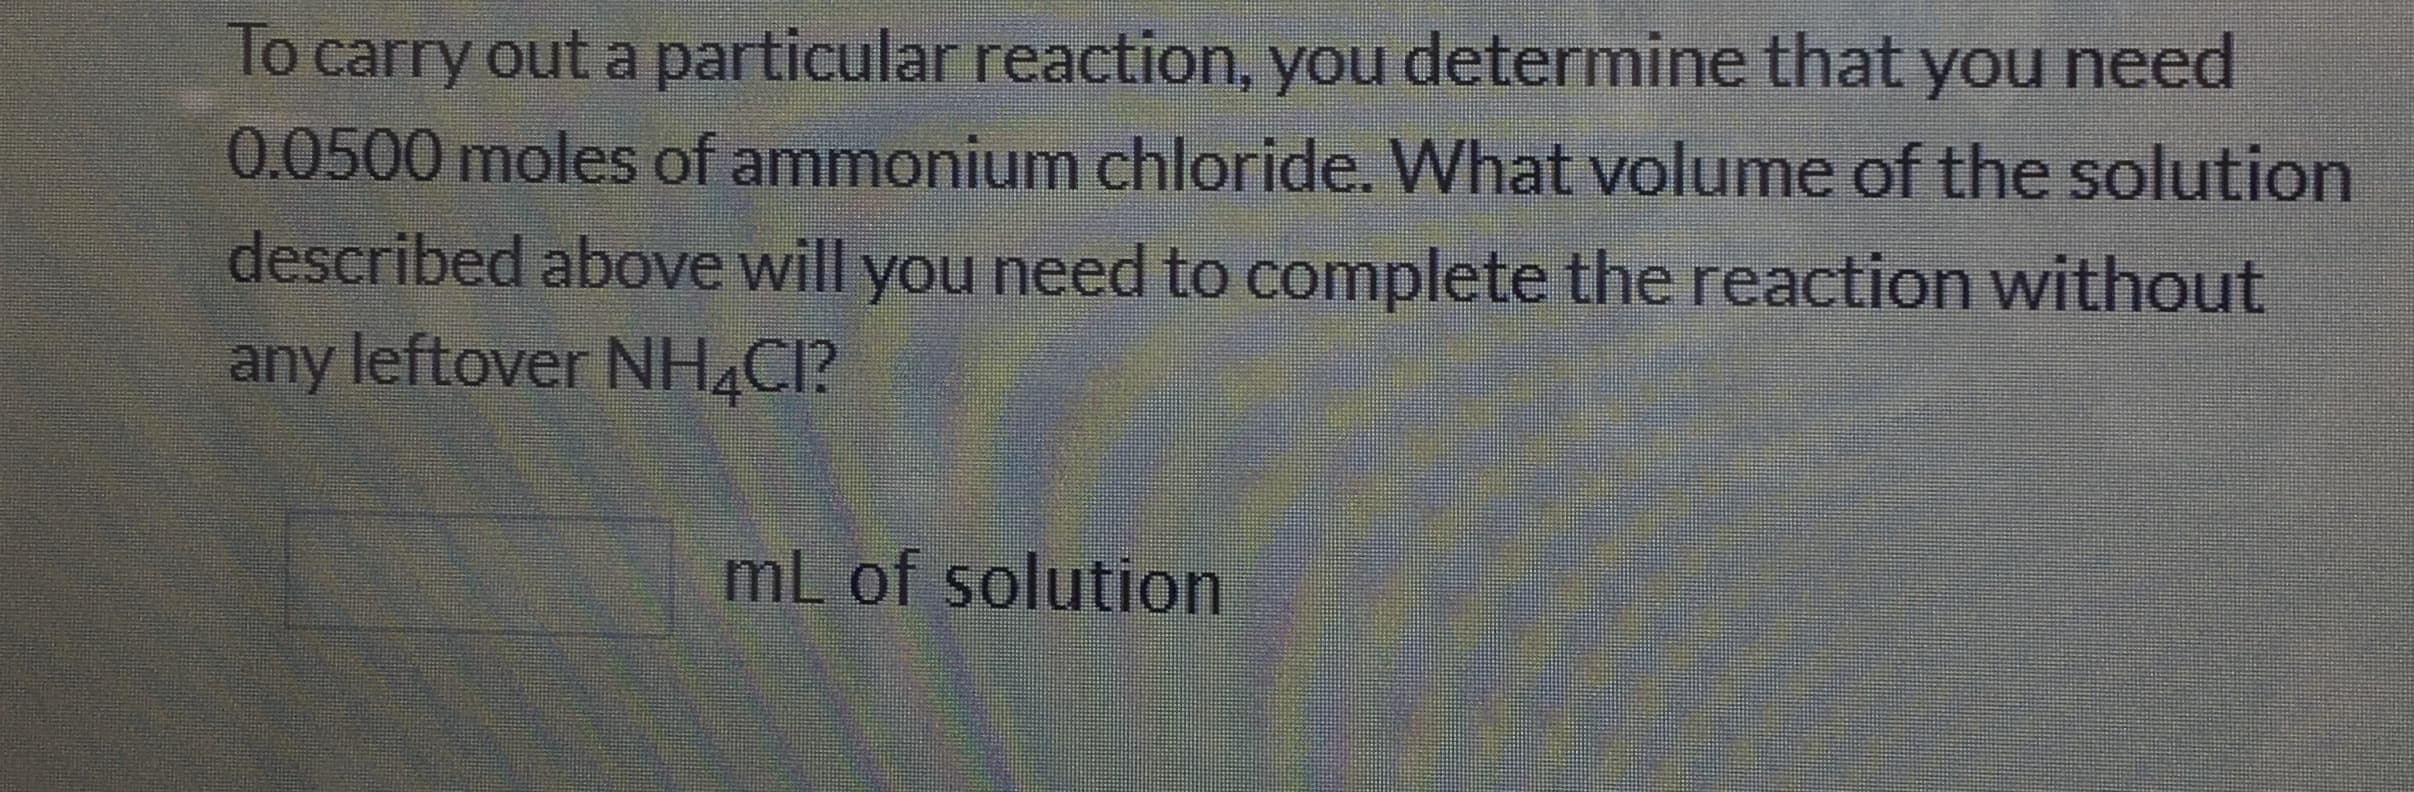 To carry out a particular reaction, you determine that you need
0.0500 moles of ammonium chloride. What volume of the solution
described above will you need to complete the reaction without
any leftover NH4CI?
mL of solution
